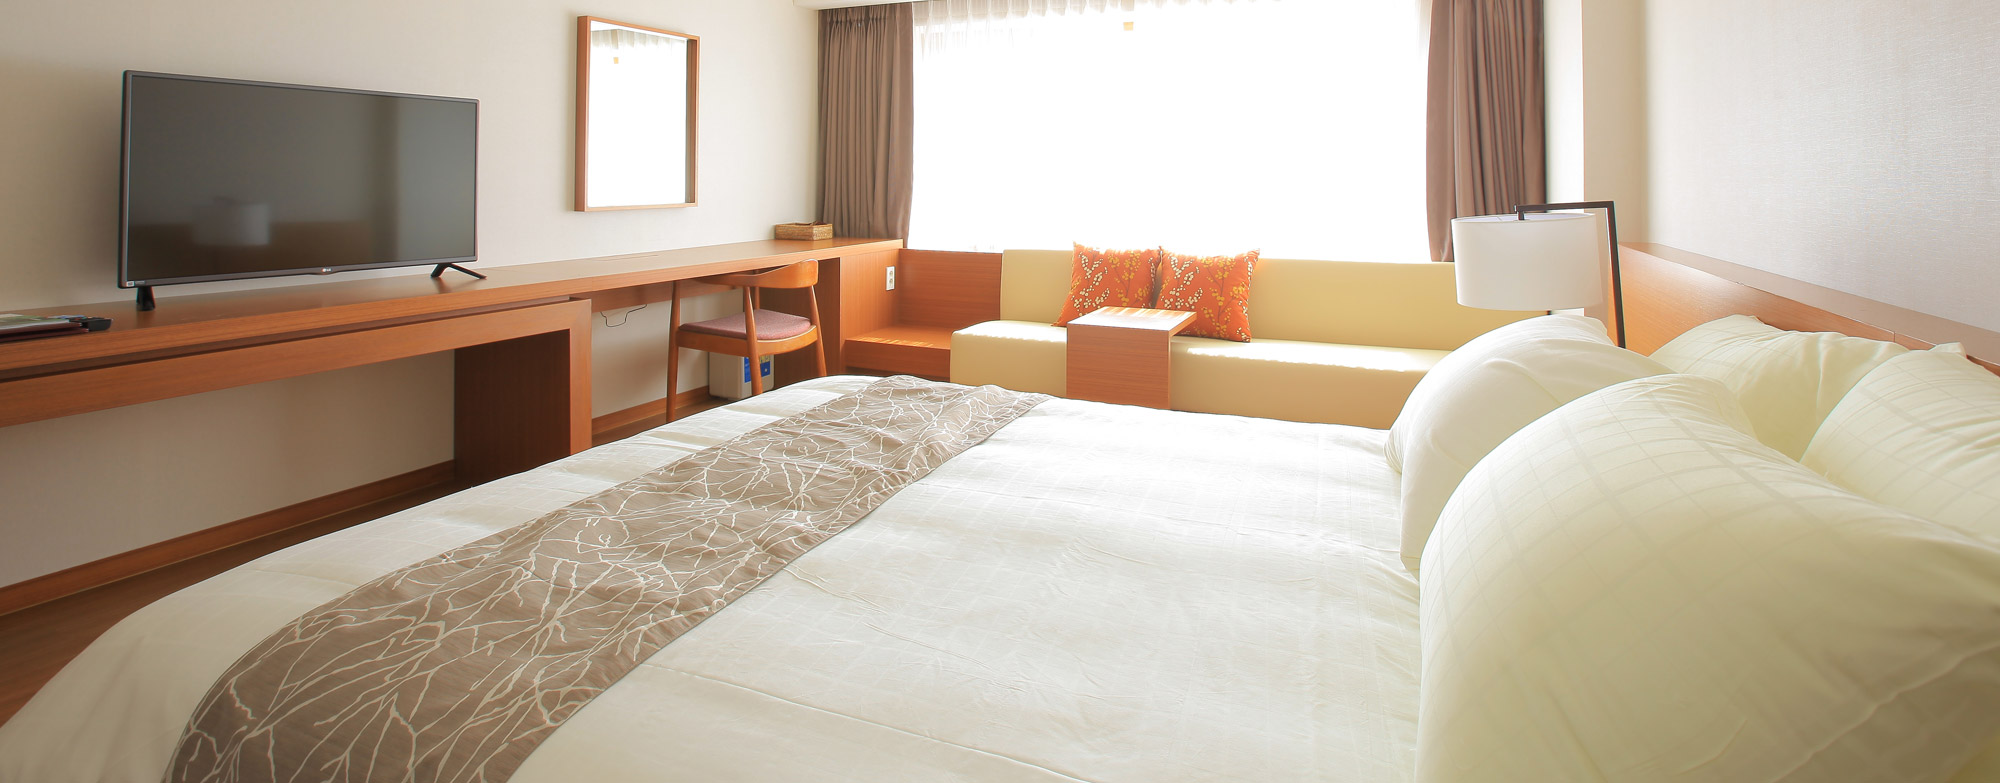 Image of Dragon Valley Hotel Delux Room